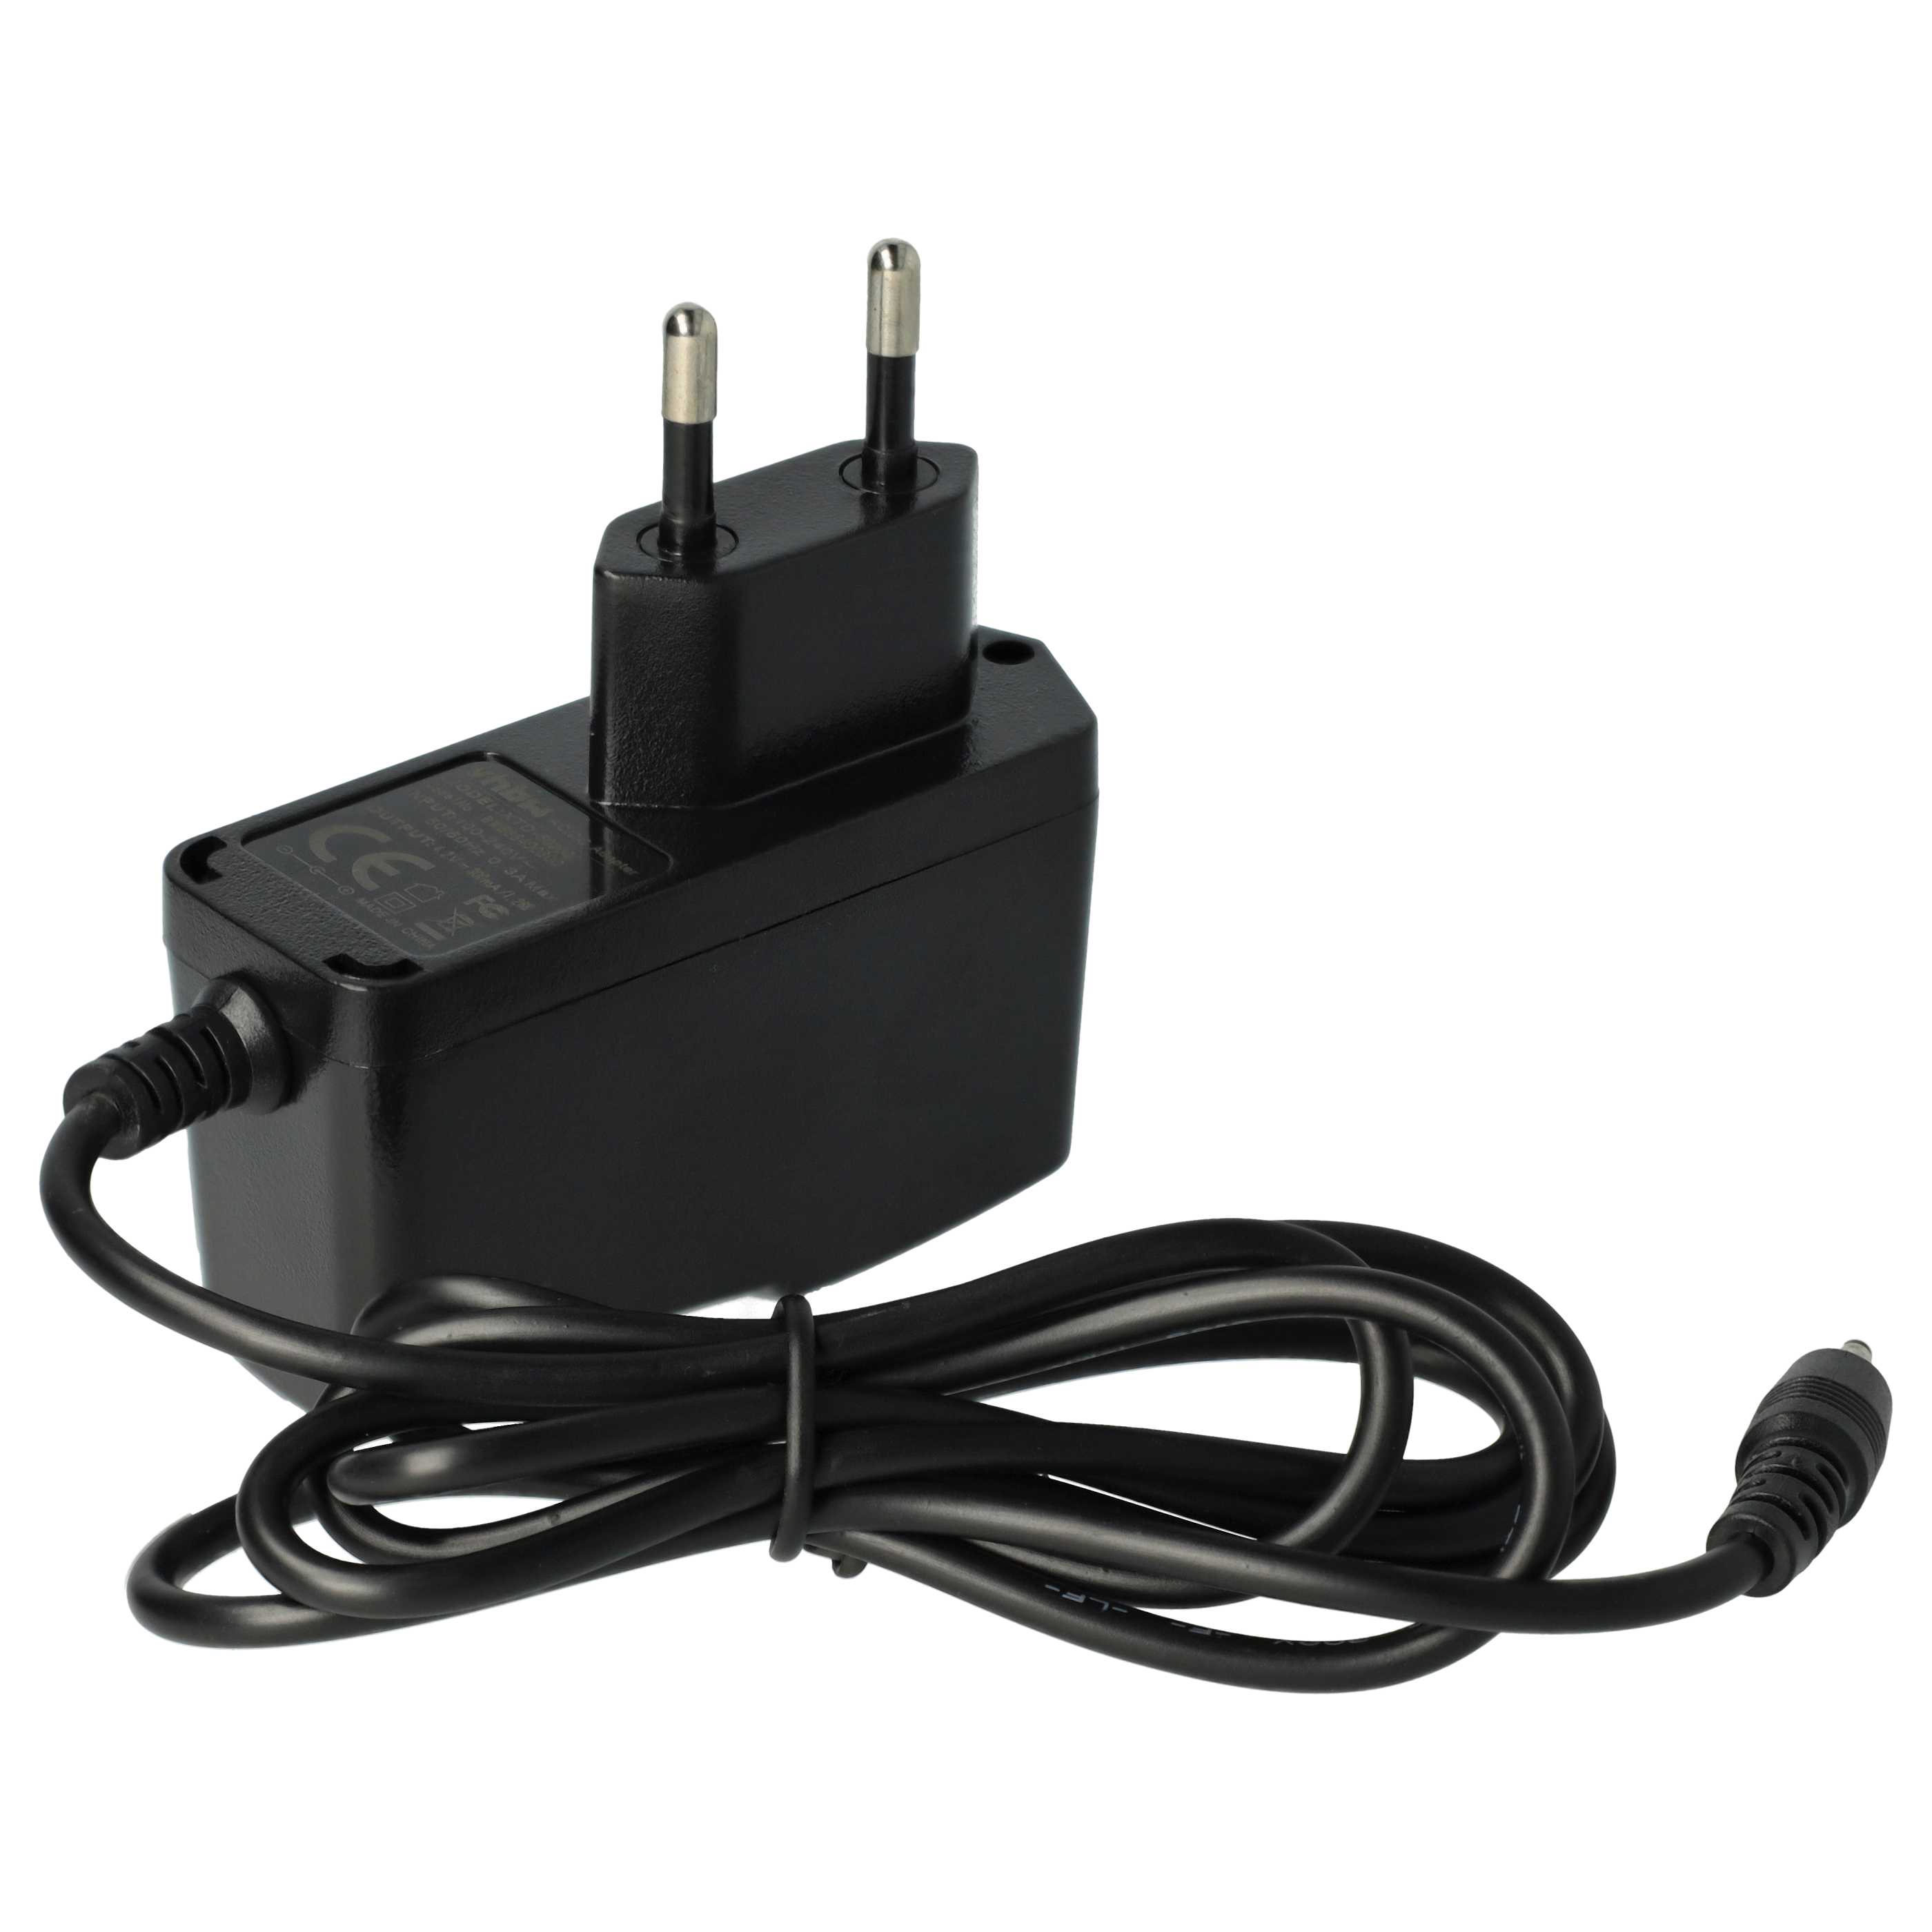 Mains Power Adapter replaces Gibson GBP-042030 for Gibson E-Guitar Tuning Device